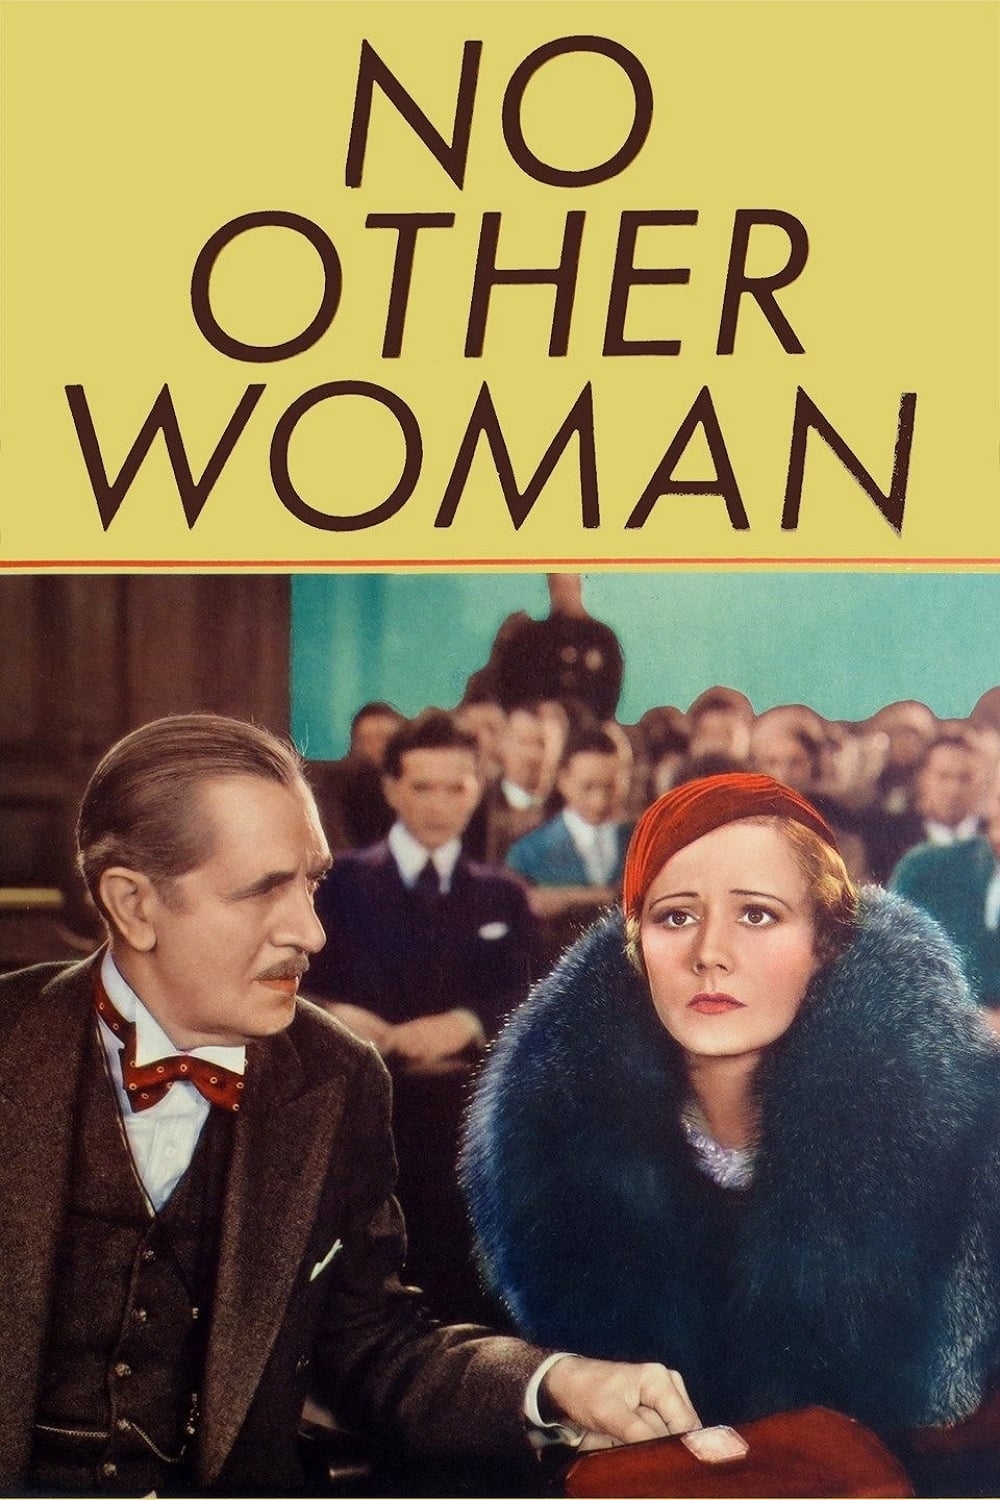 No Other Woman Movie Poster Id Image Abyss